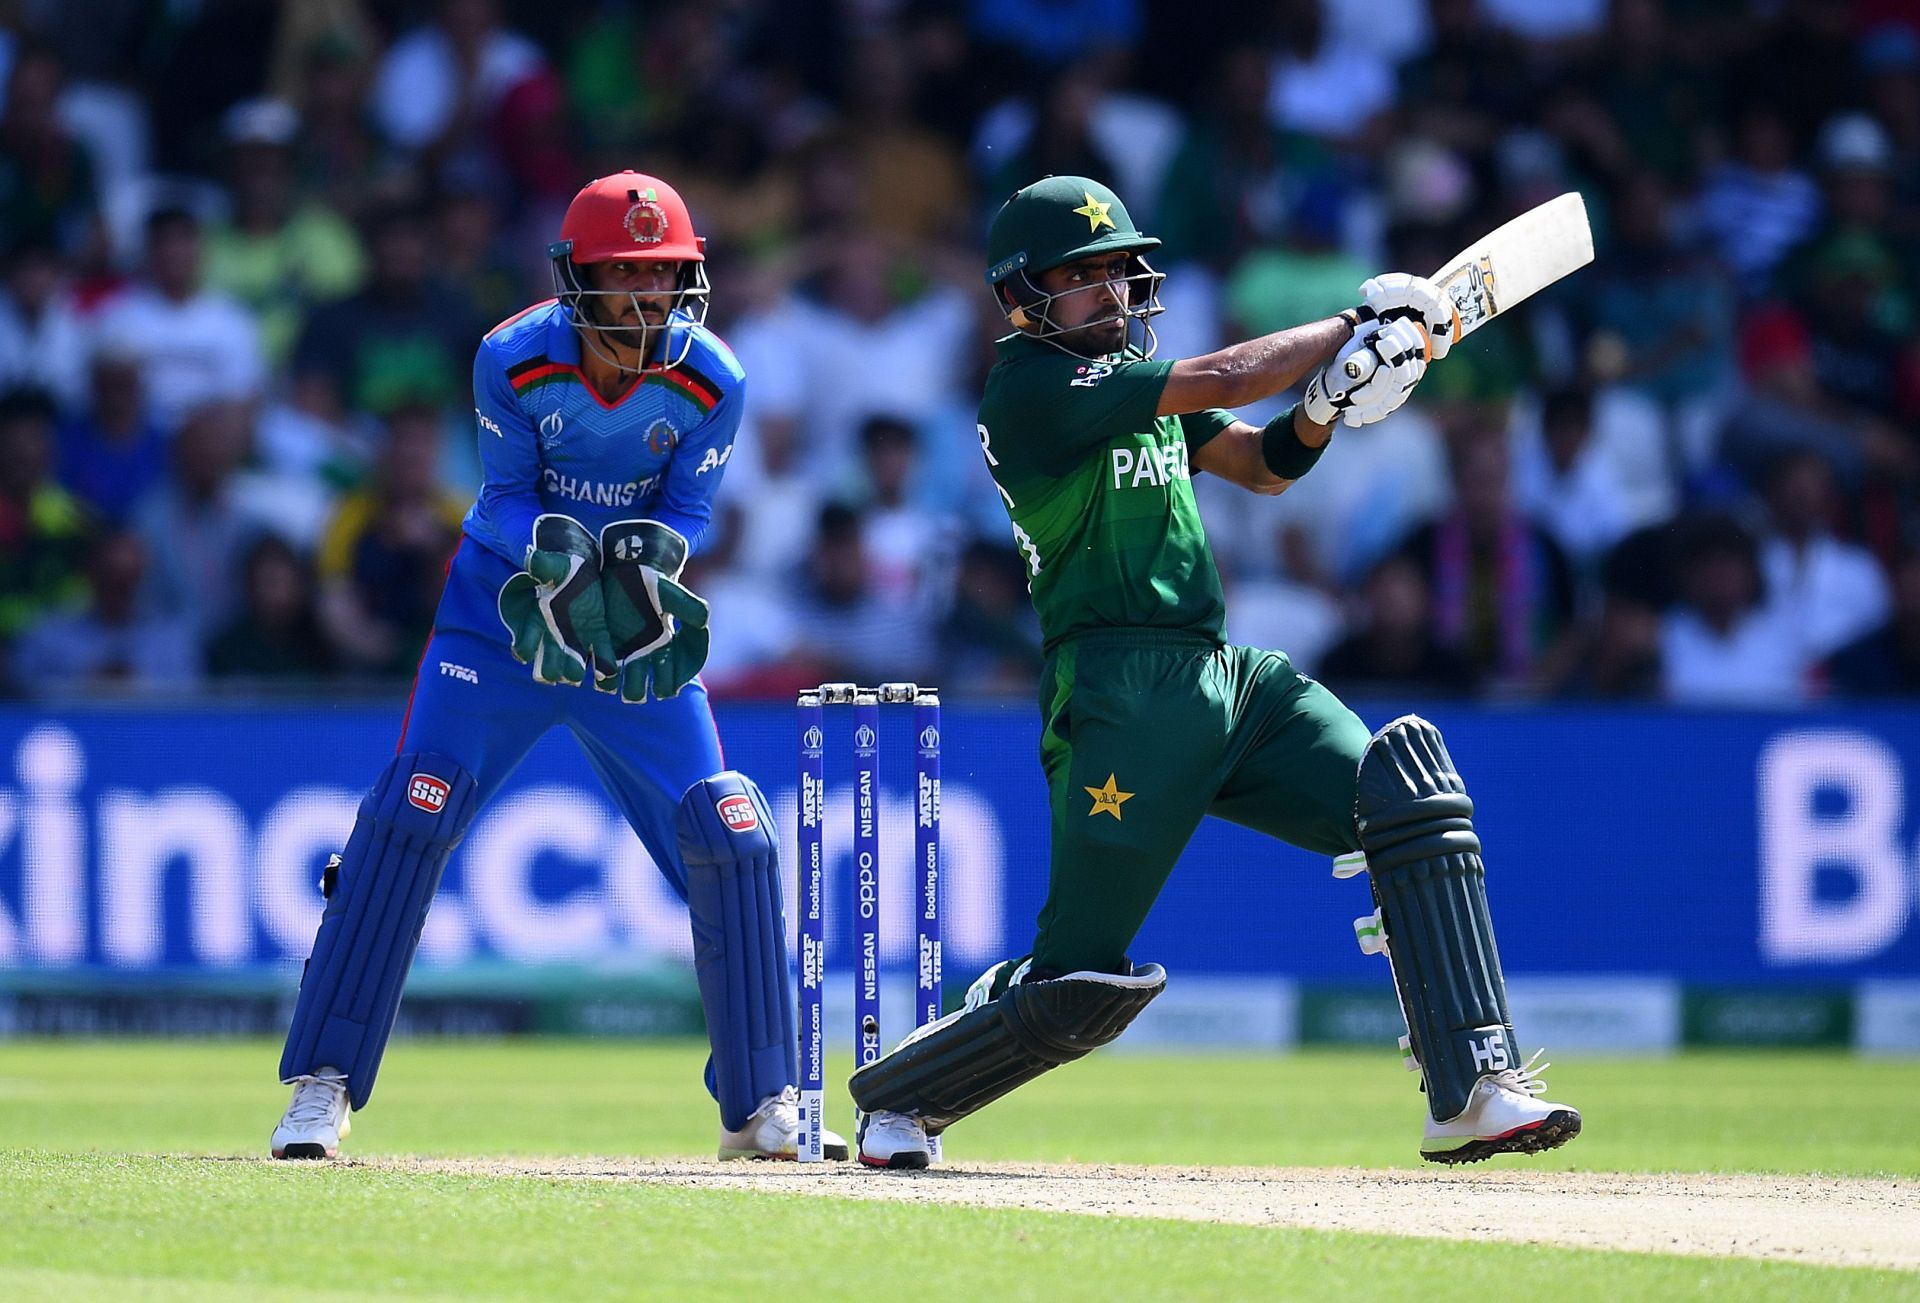 Can Pakistan complete a hat-trick of victories in the ICC T20 World Cup 2021?